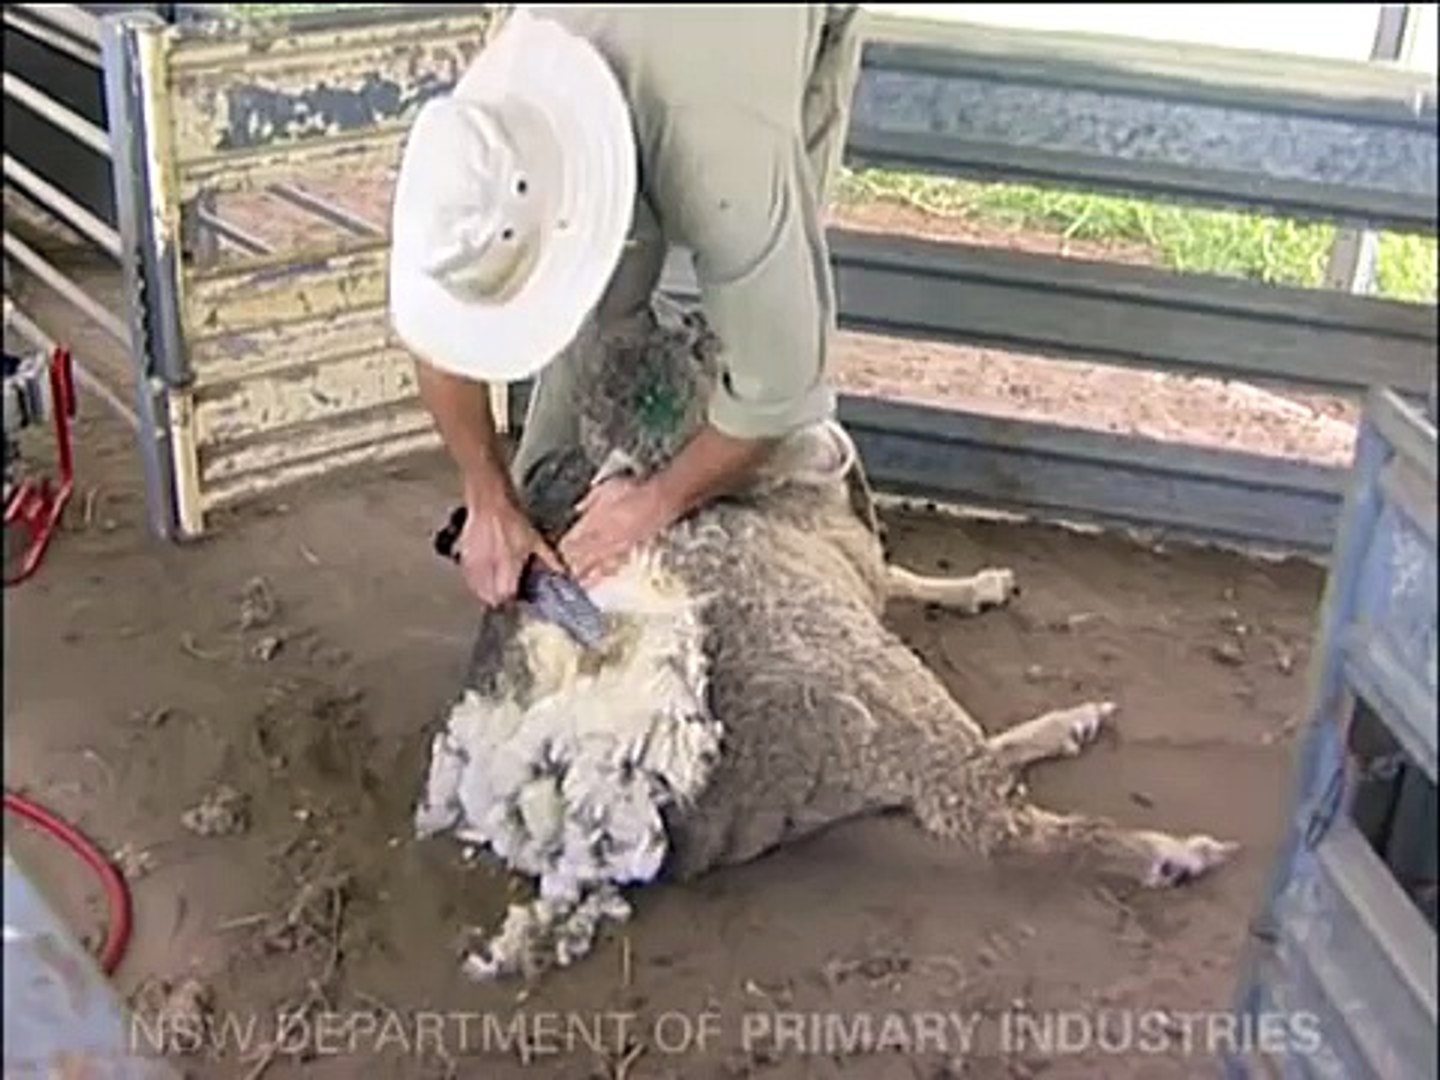 Huge mangoworms,maggots in sheep - treatment mango worms under the skin -  video Dailymotion